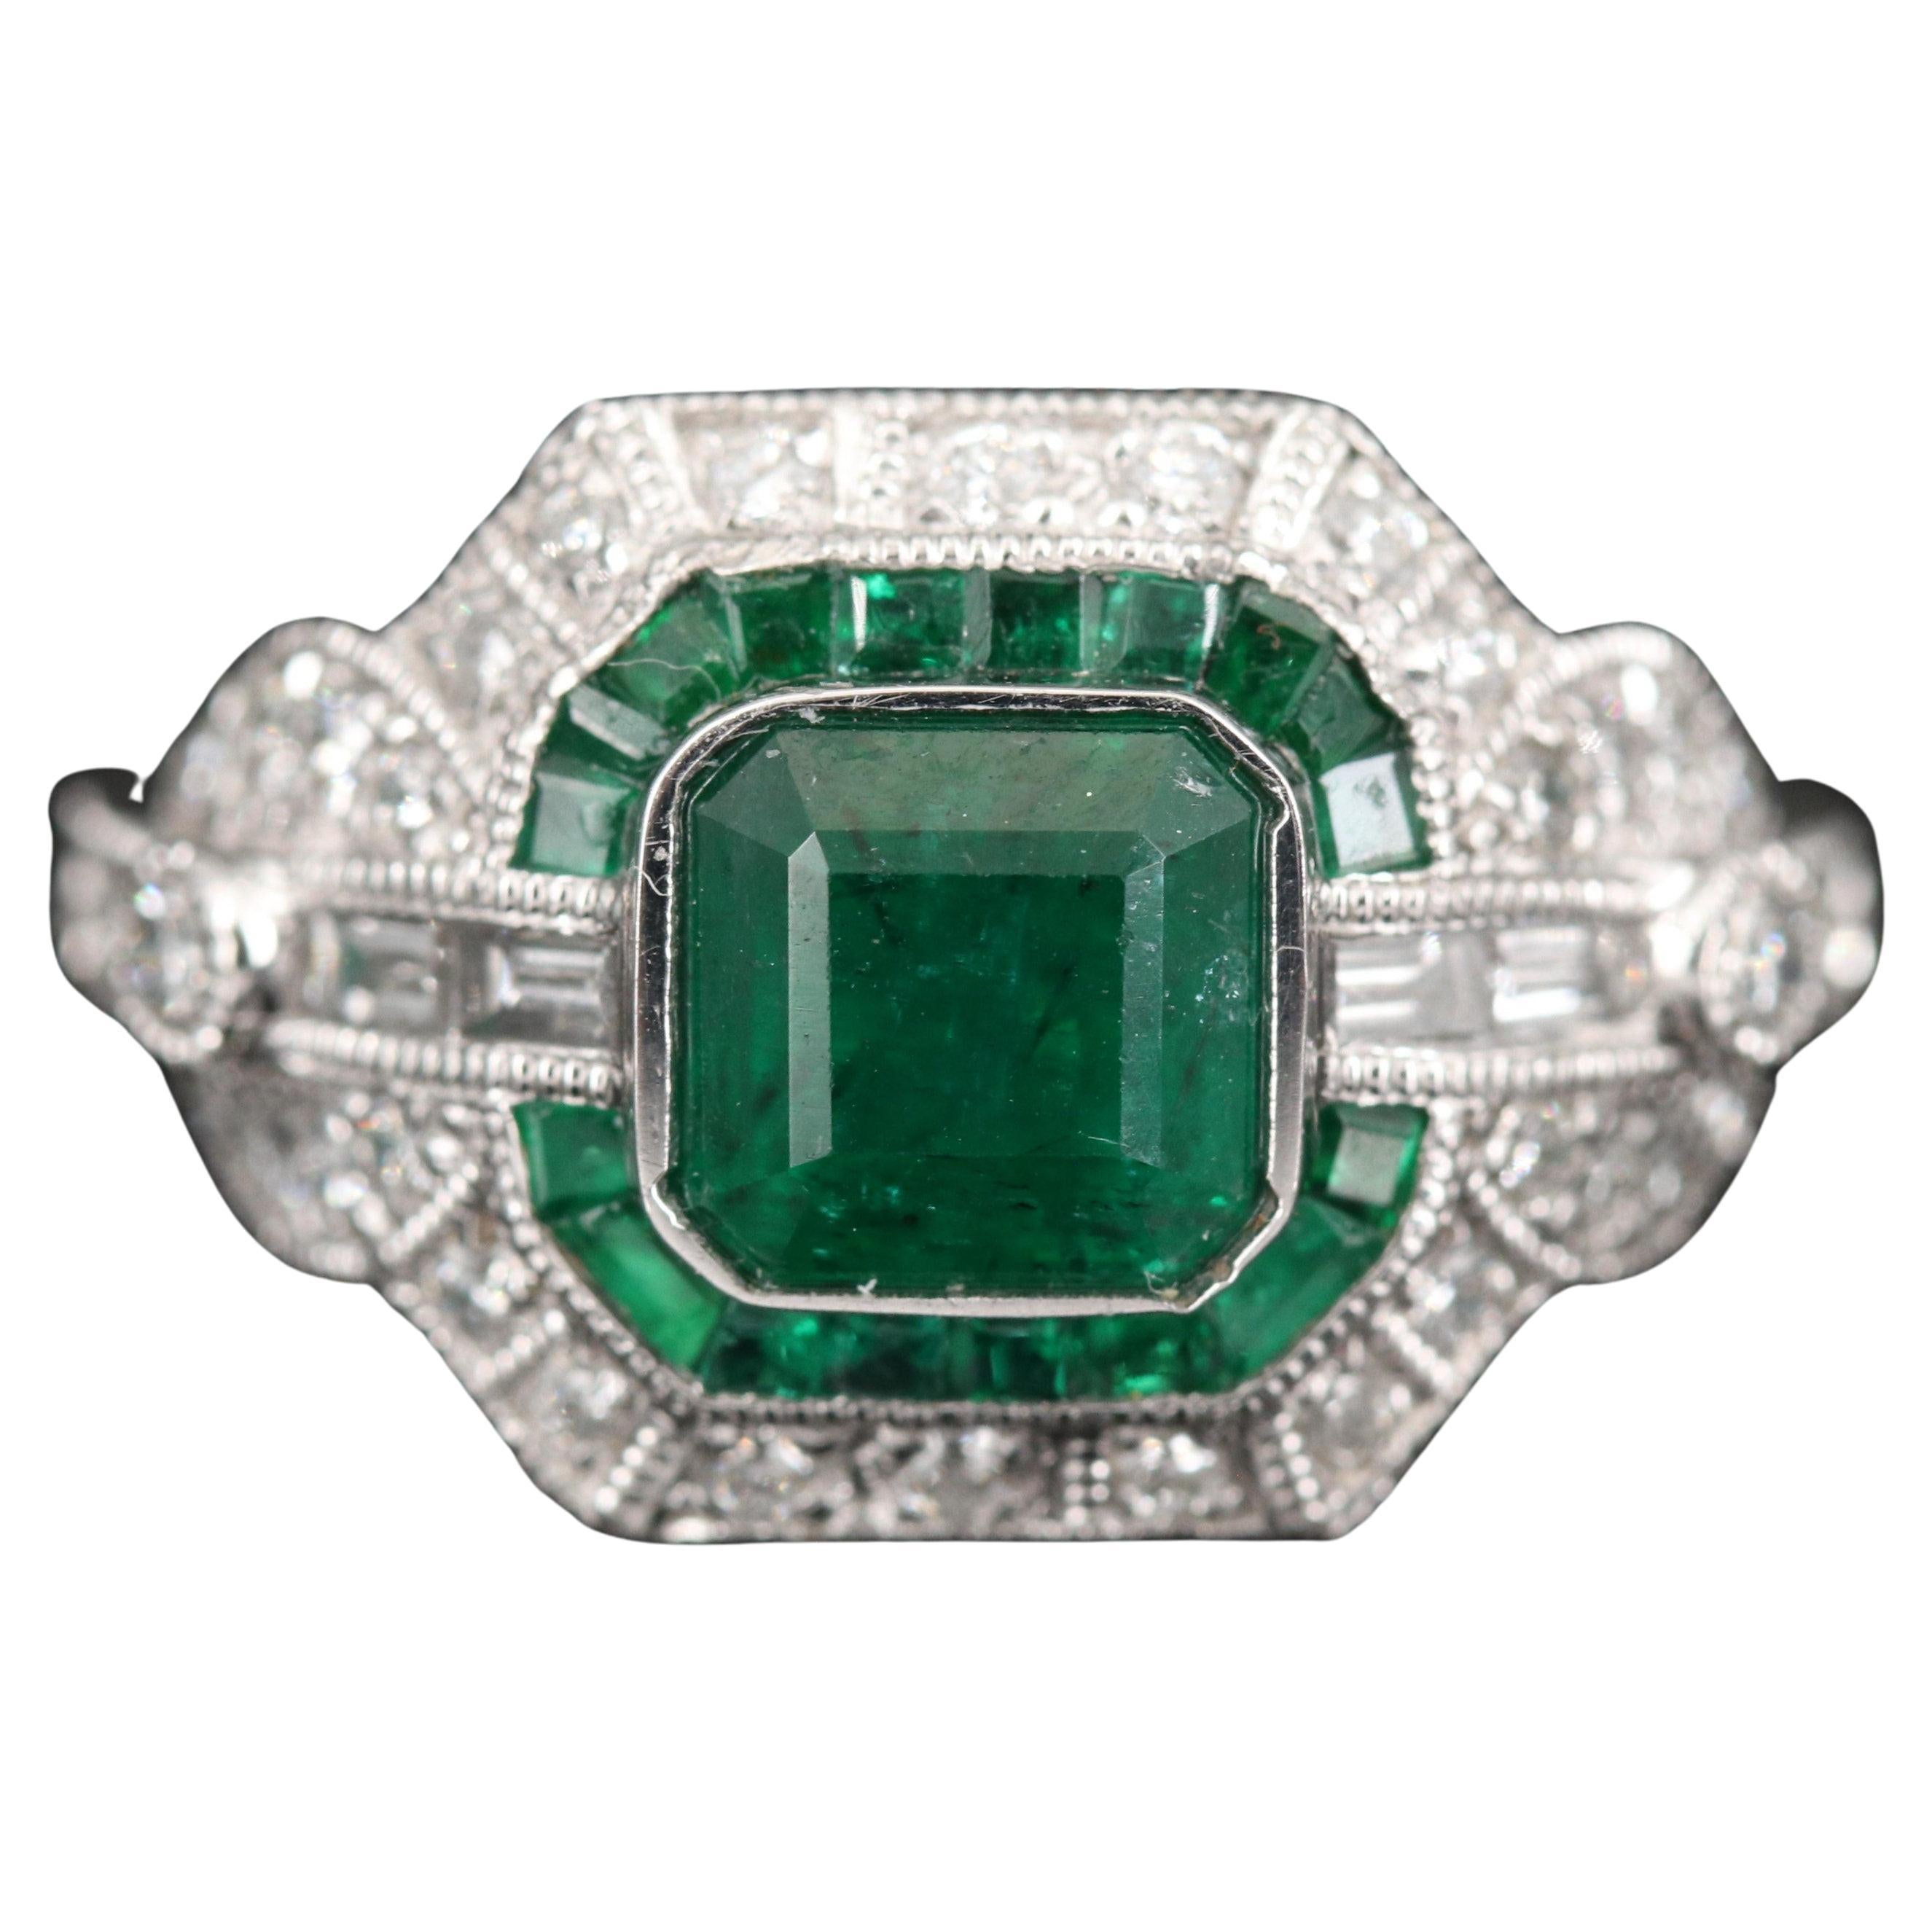 For Sale:  Vintage 4.2 Carat Emerald Diamond Engagement Ring, Cluster Diamond Cocktail Ring